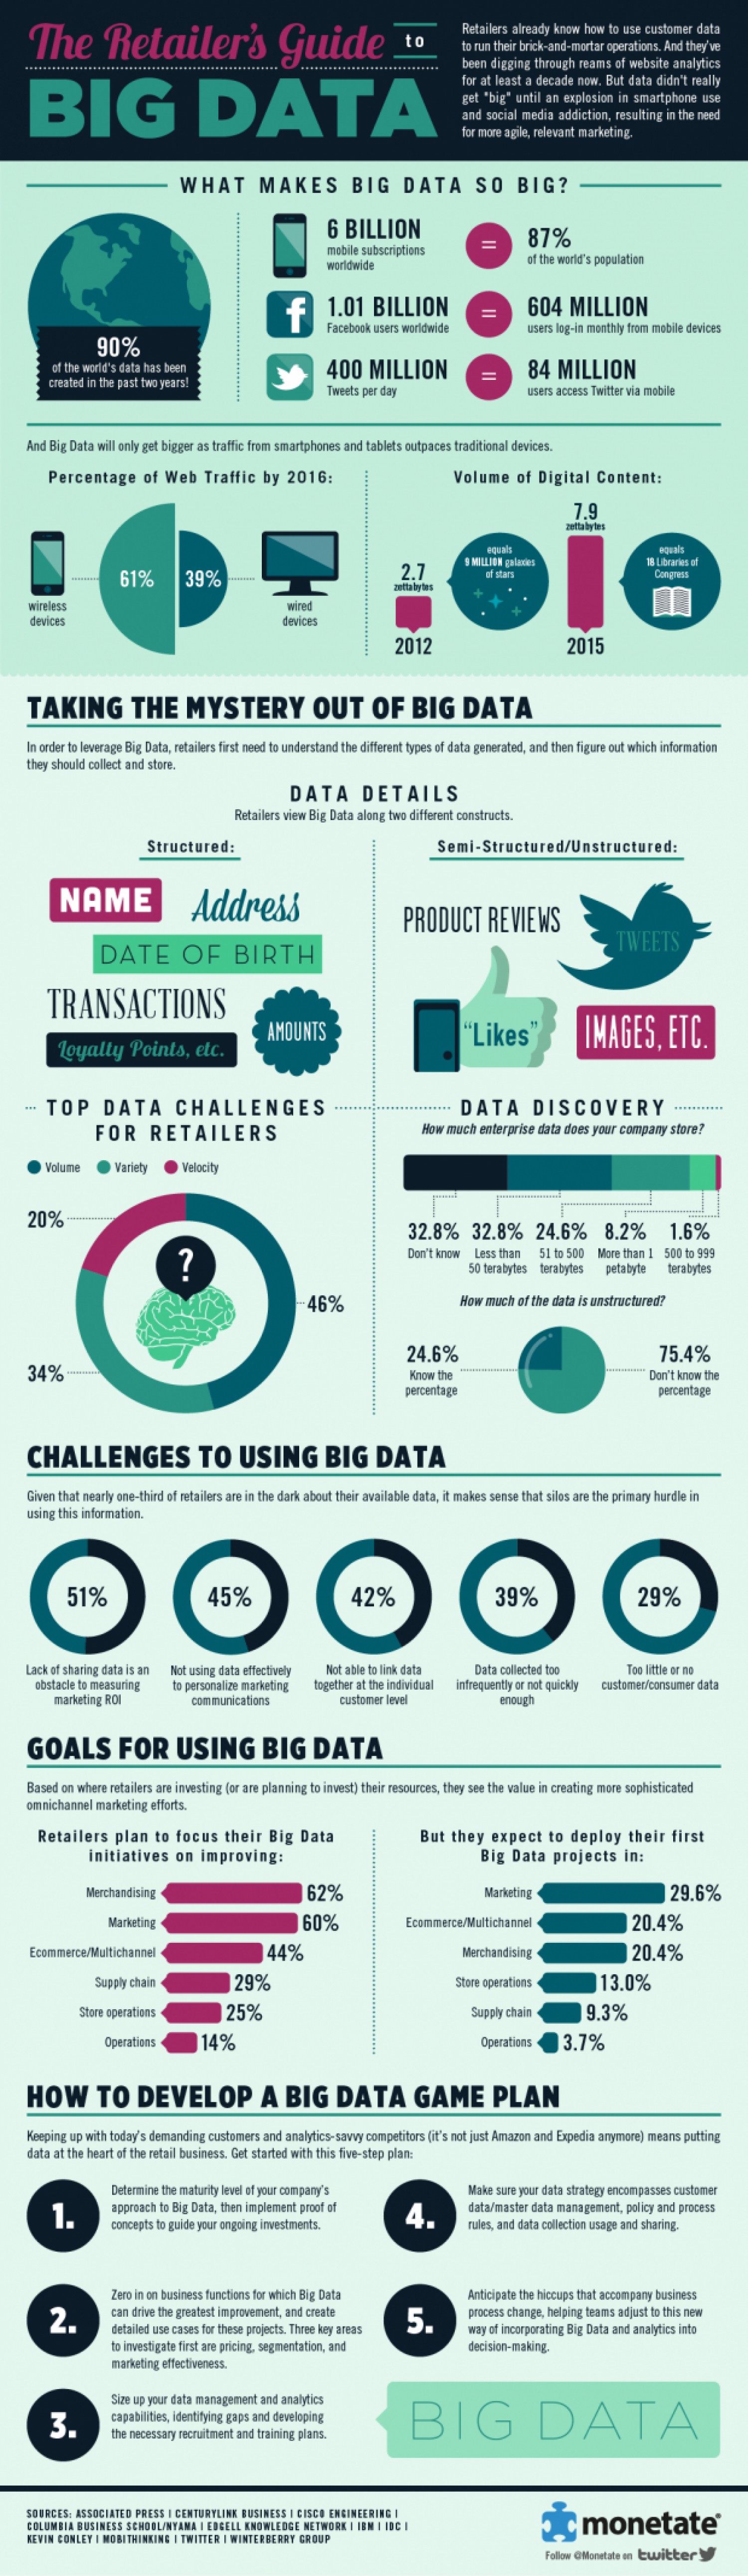 The retailer's guide of big data